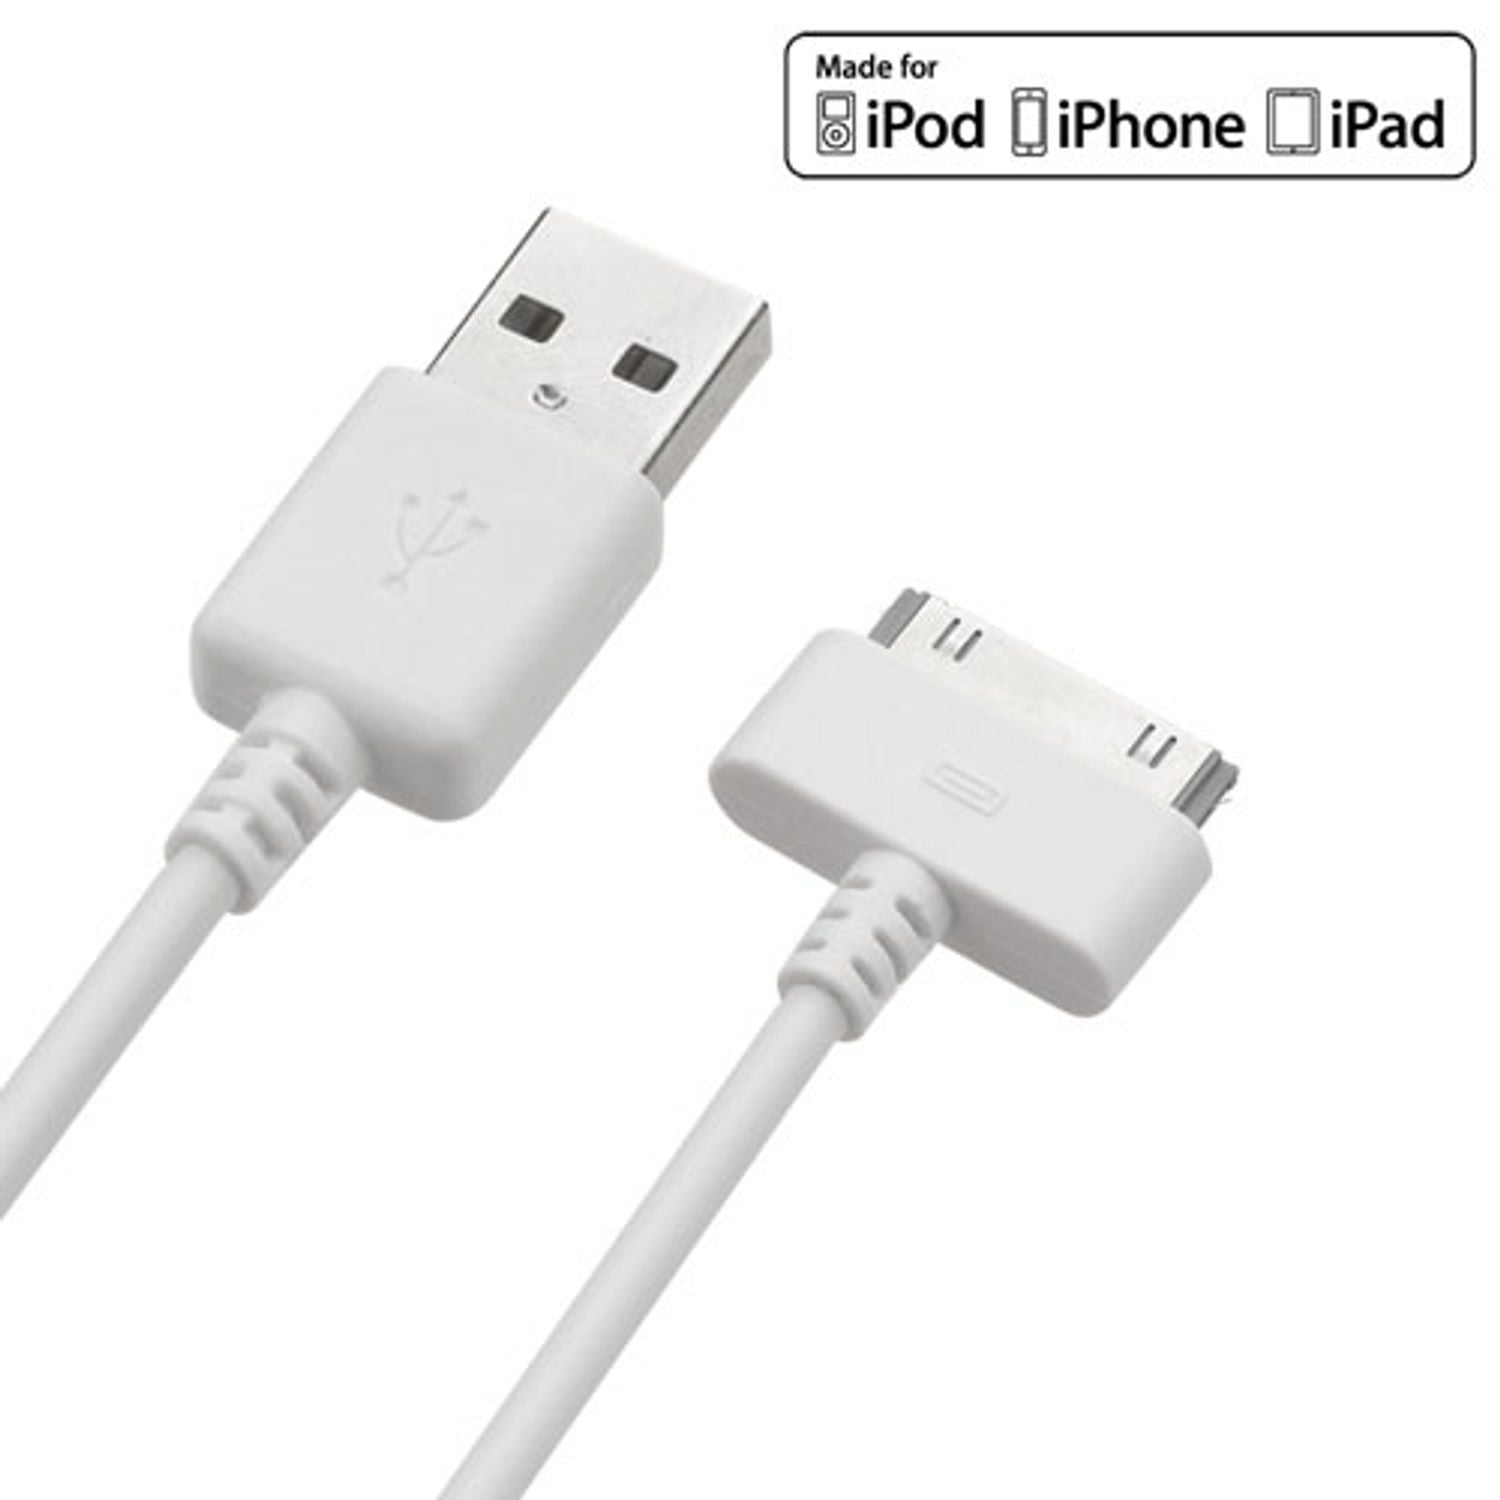 30-Pin to USB C Adapter Cable for iPhone, iPad, iPod – 3ft (Next-Generation  Data Cable/Charging Cable from USB C to Dock Connector for iPhone